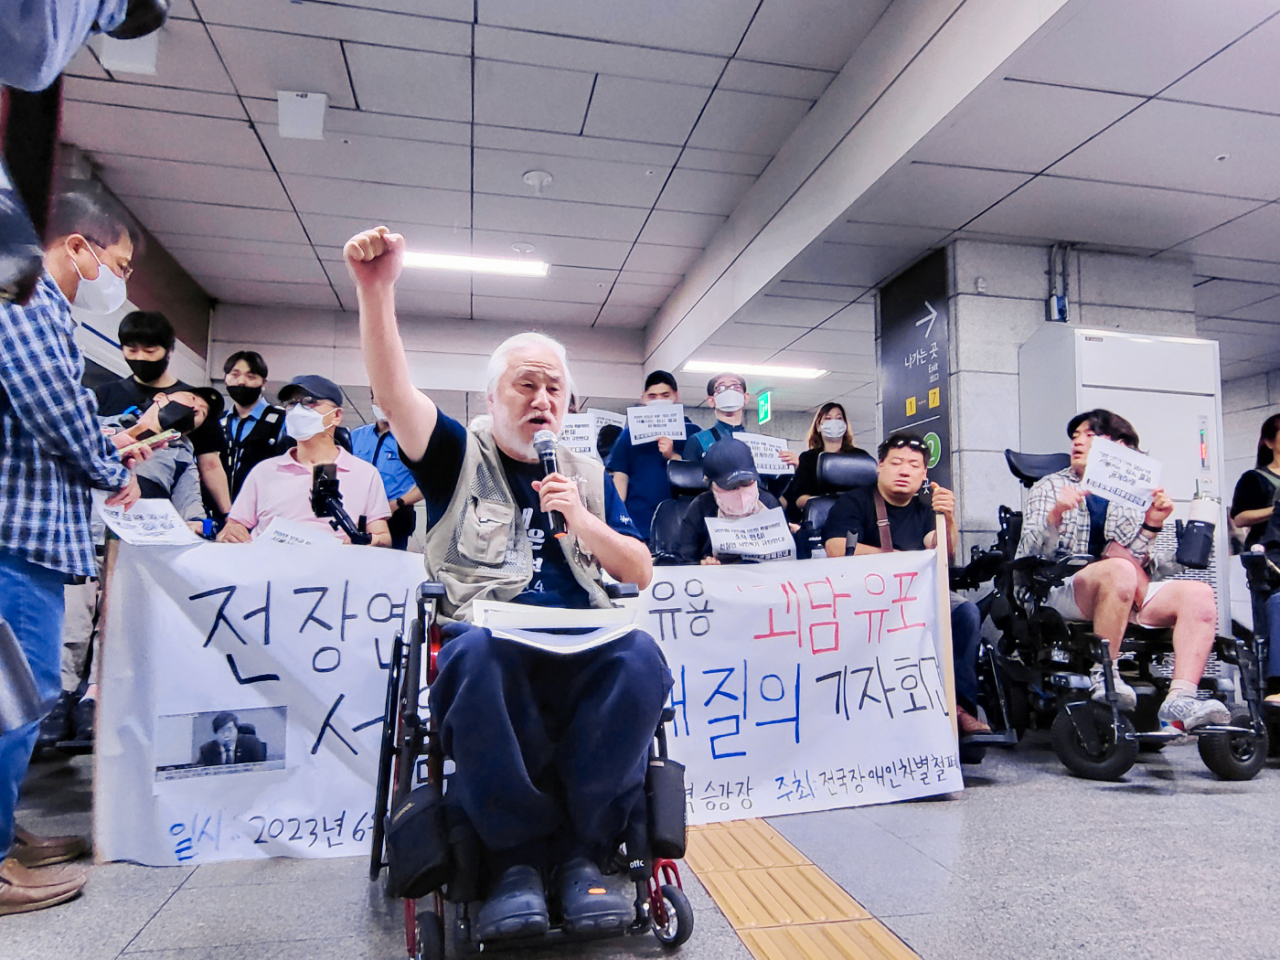 Park Kyoung-seok, co-leader of the Solidarity Against Disability Discrimination advocacy group, speaks during a press conference at City Hall Station on Line No. 1 on June 13. (Yonhap)